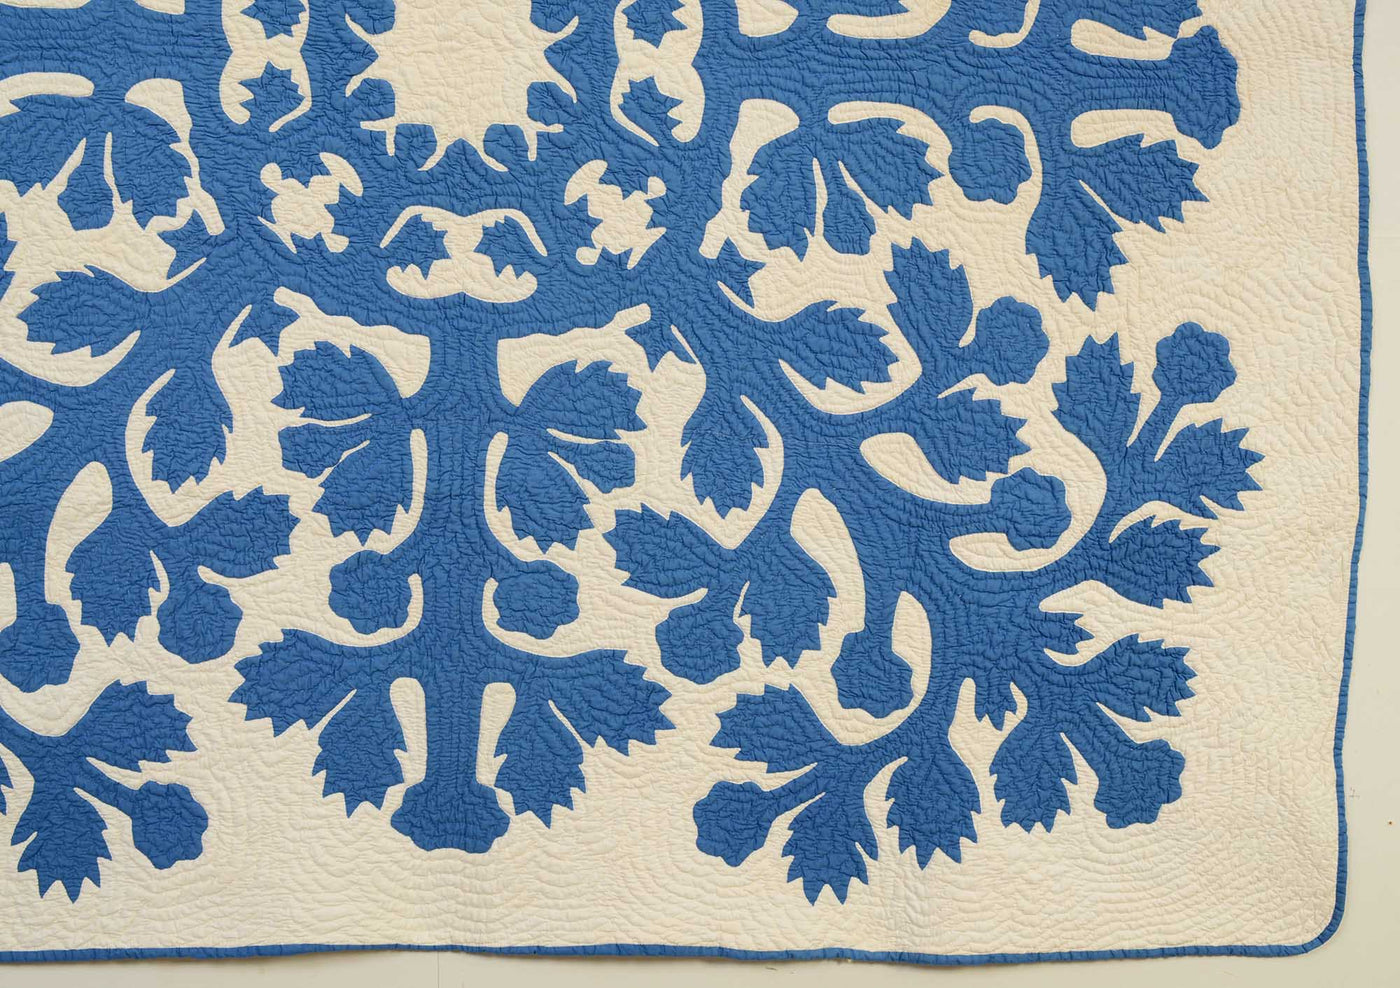 Bottom border of Hawaiian Applique Quilt Circa 1930's with blue flower on white background.